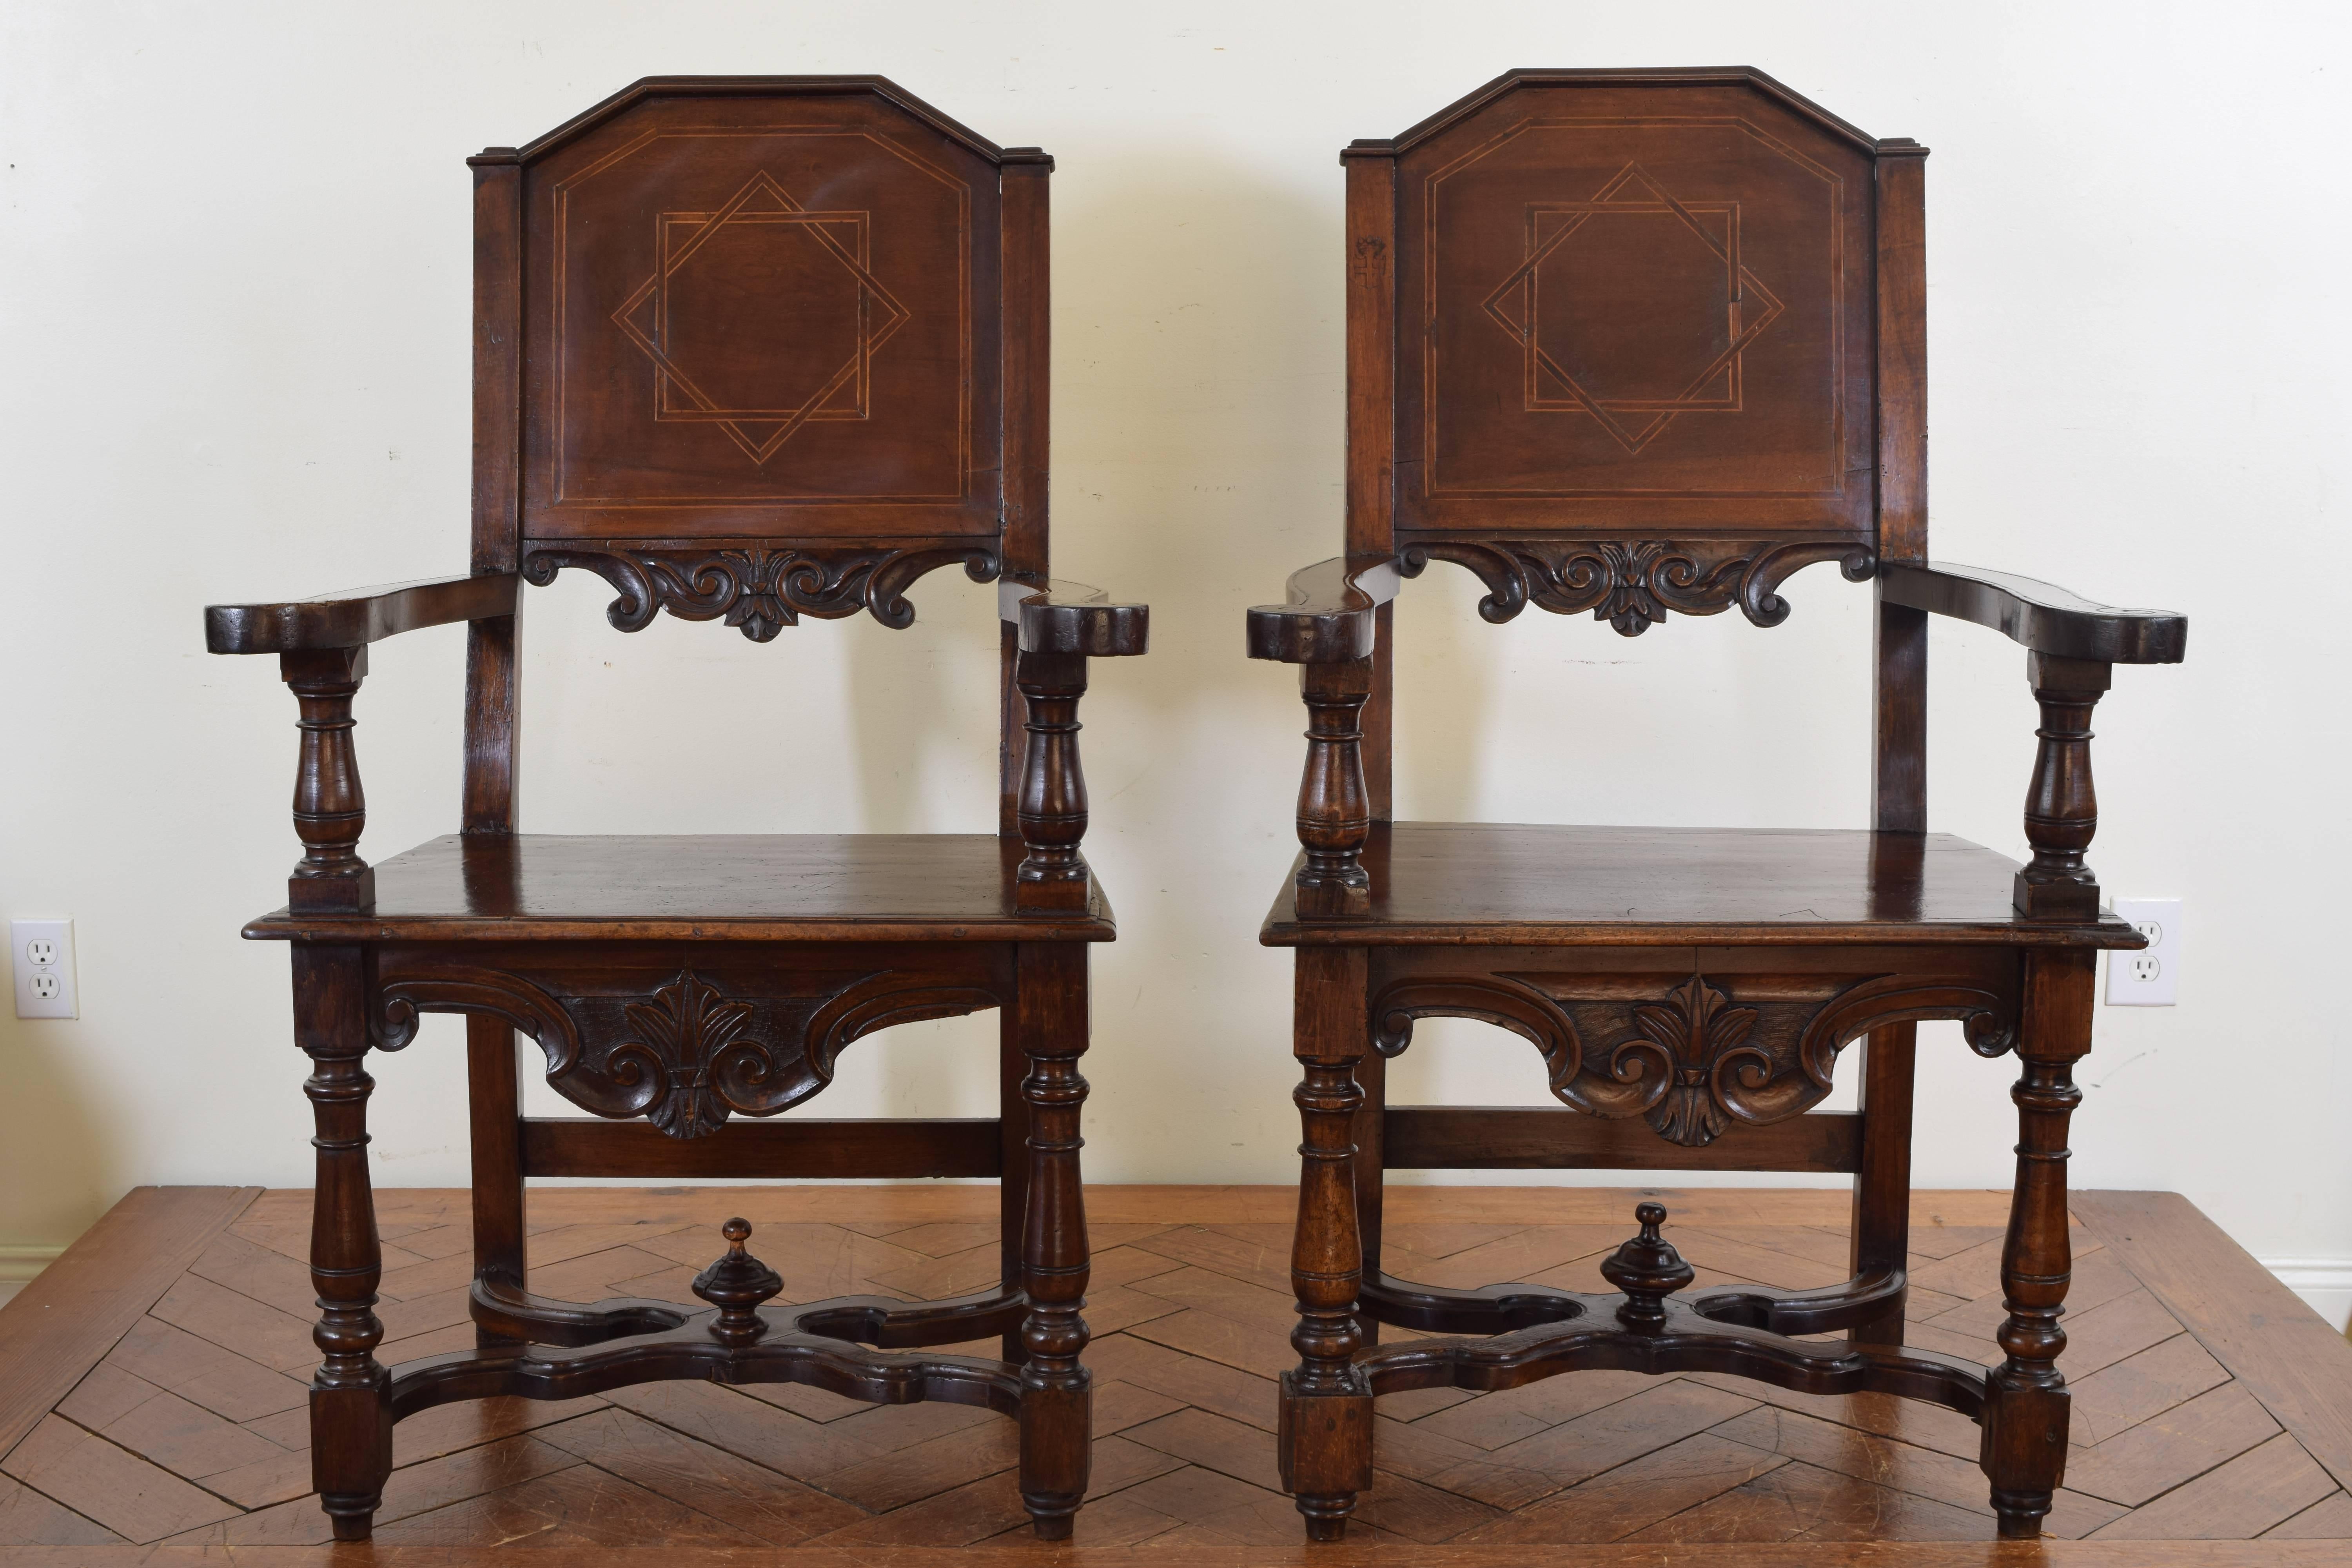 The backrests with a slight lean and having shaped arches, the lower section of the backrests carved, generous seats and curving arms supported by turned legs joined by X-form stretchers with finials.